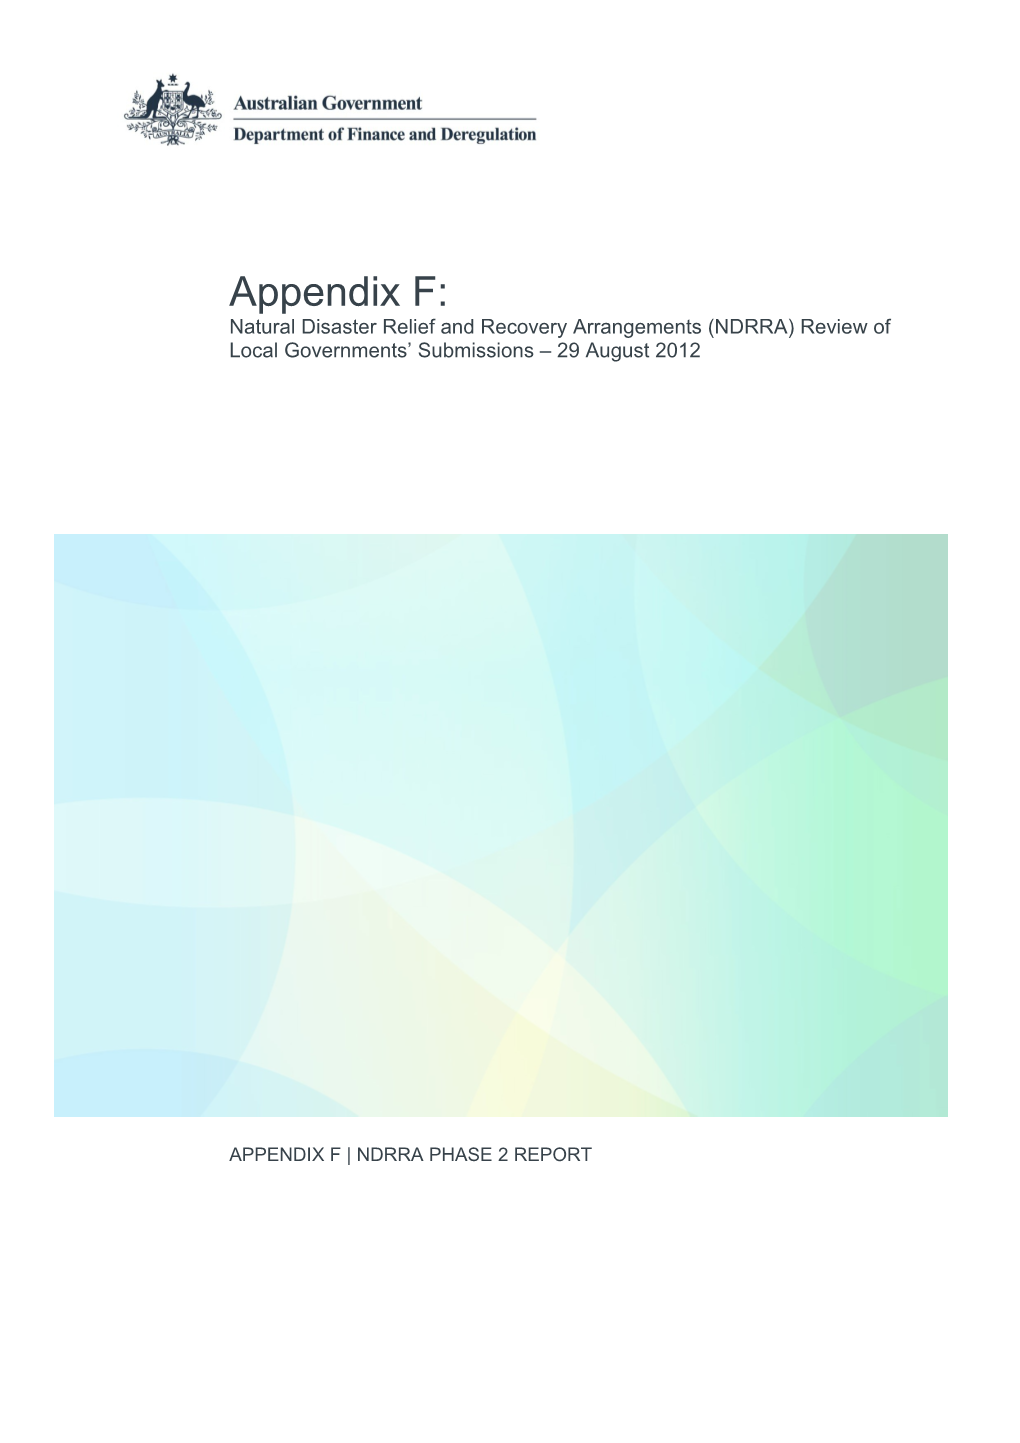 Appendix F - Natural Disaster Relief and Recovery Arrangements (NDRRA) Review of Local